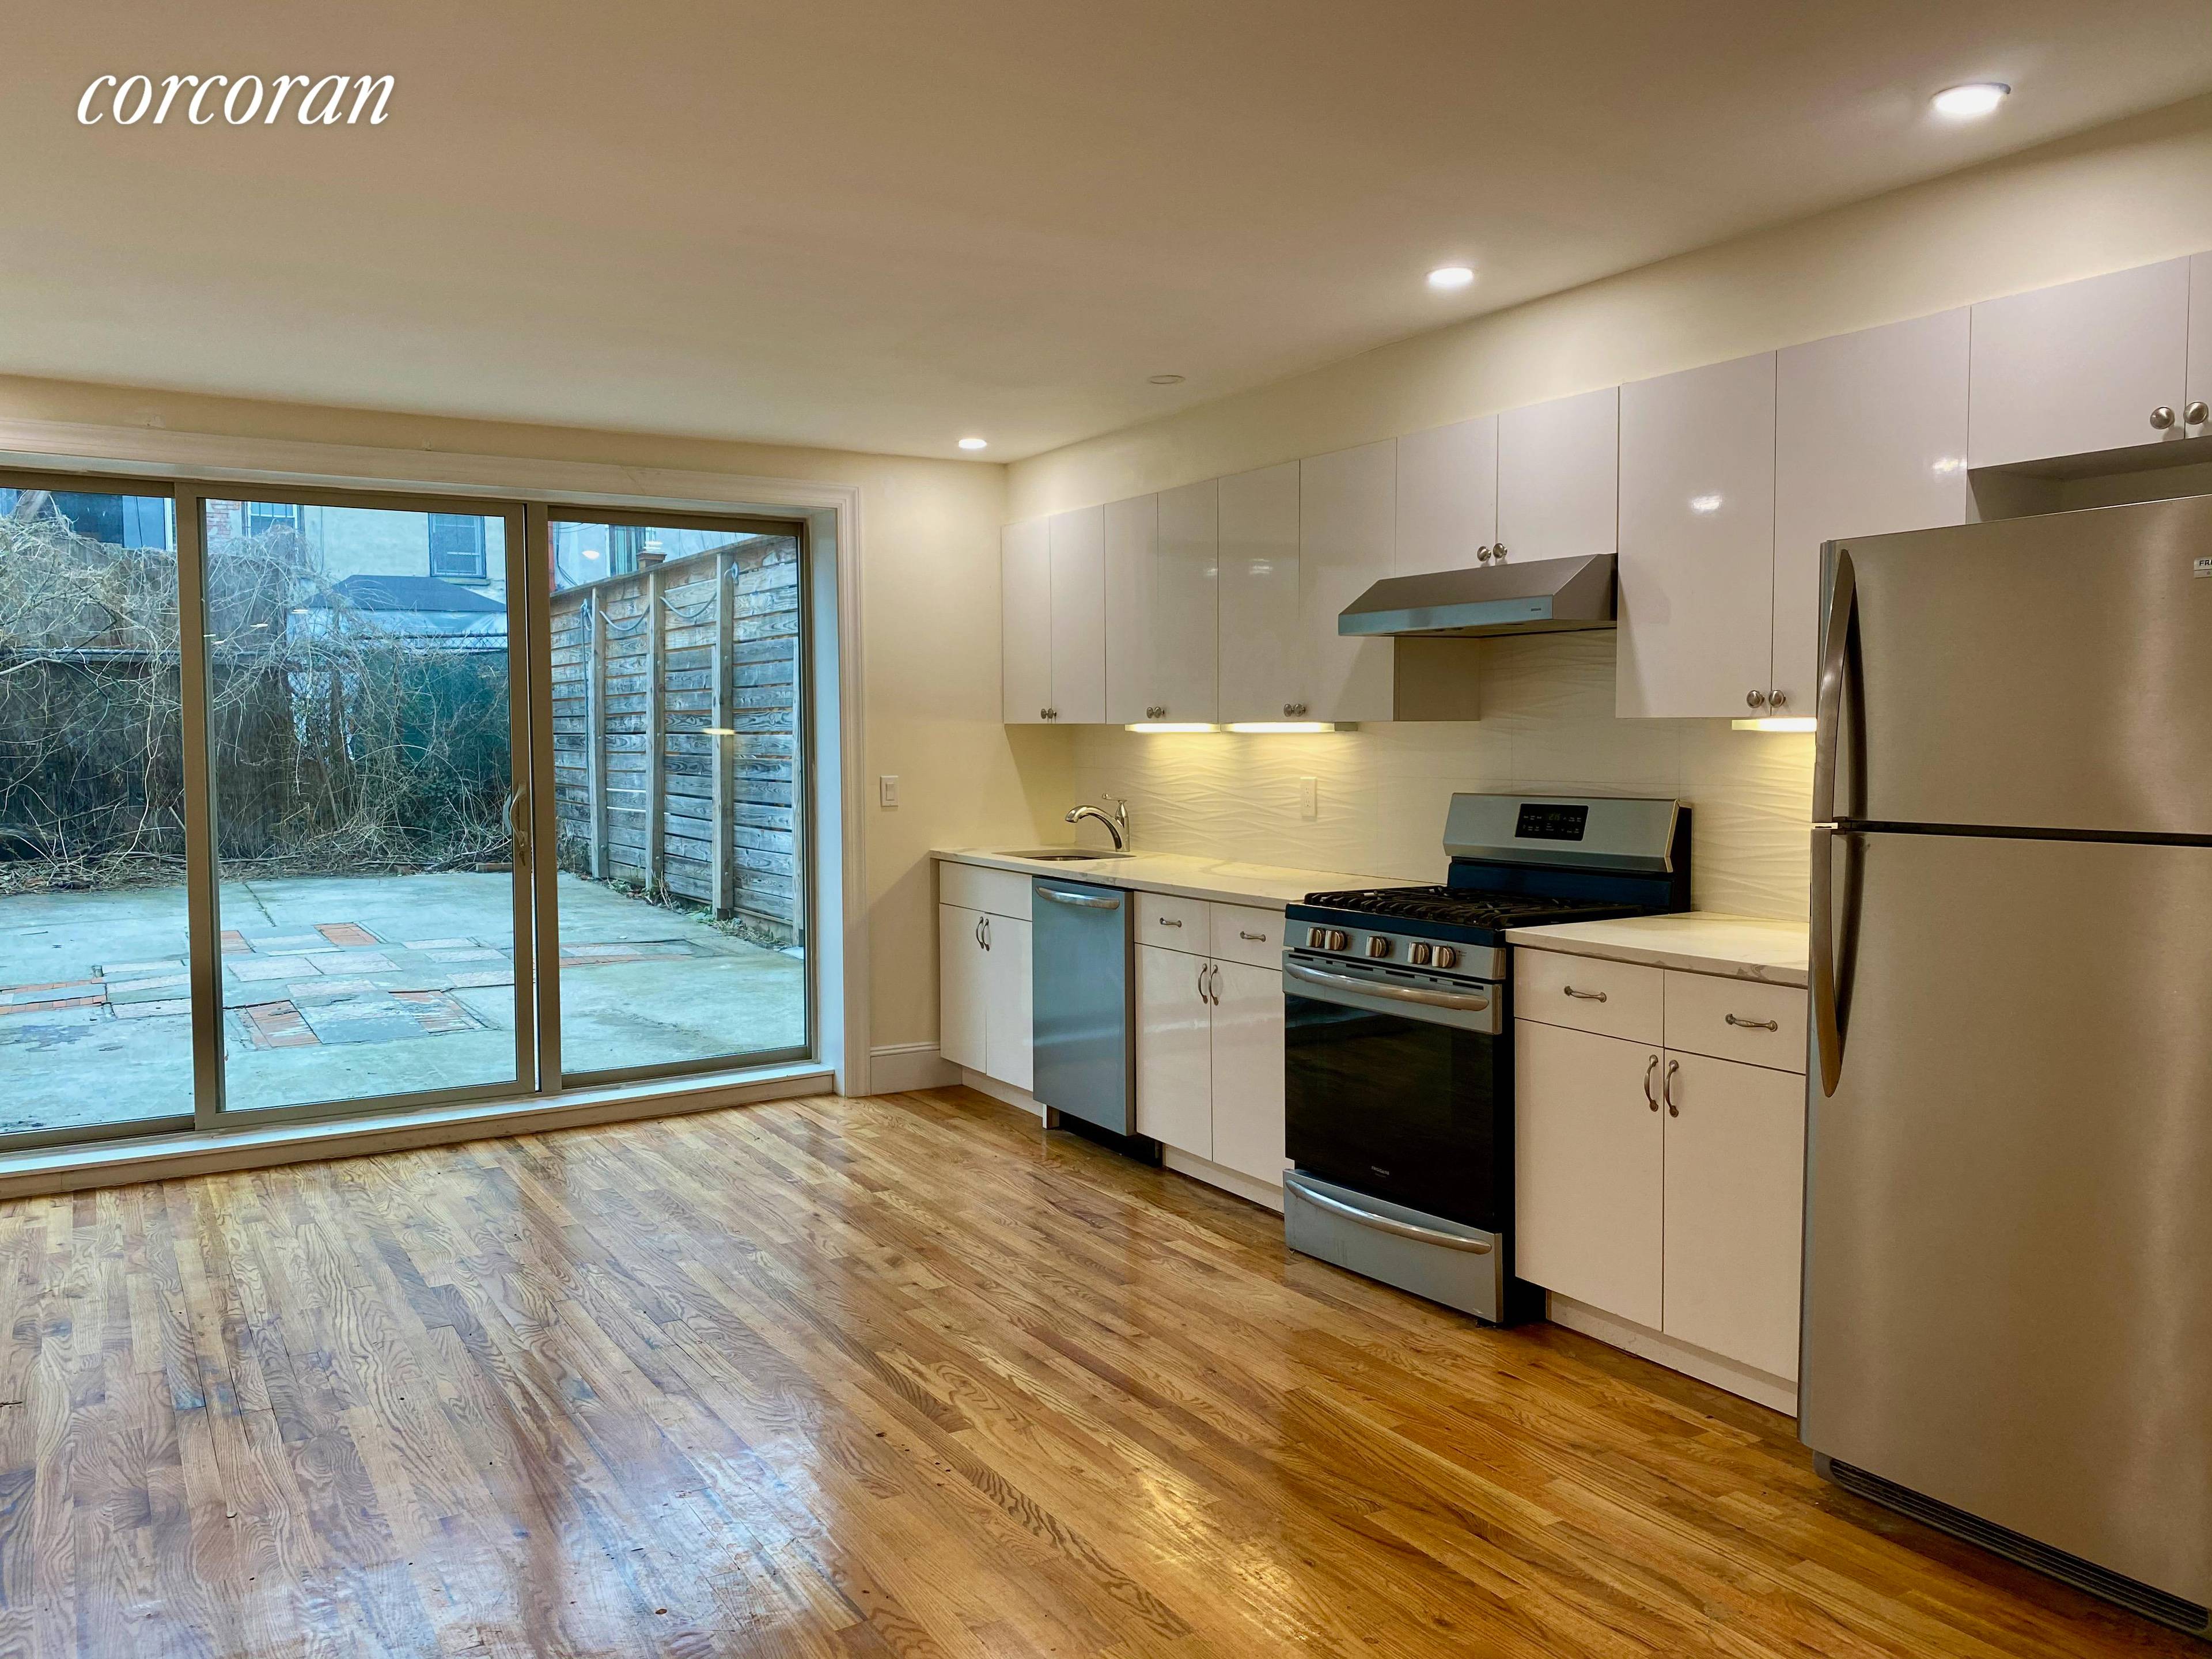 Welcome to 379 Jefferson Ave, a 2 bedroom, 2 bath duplex rental that is the perfect mix of ample living space in the comfort of a brownstone in BedStuy.